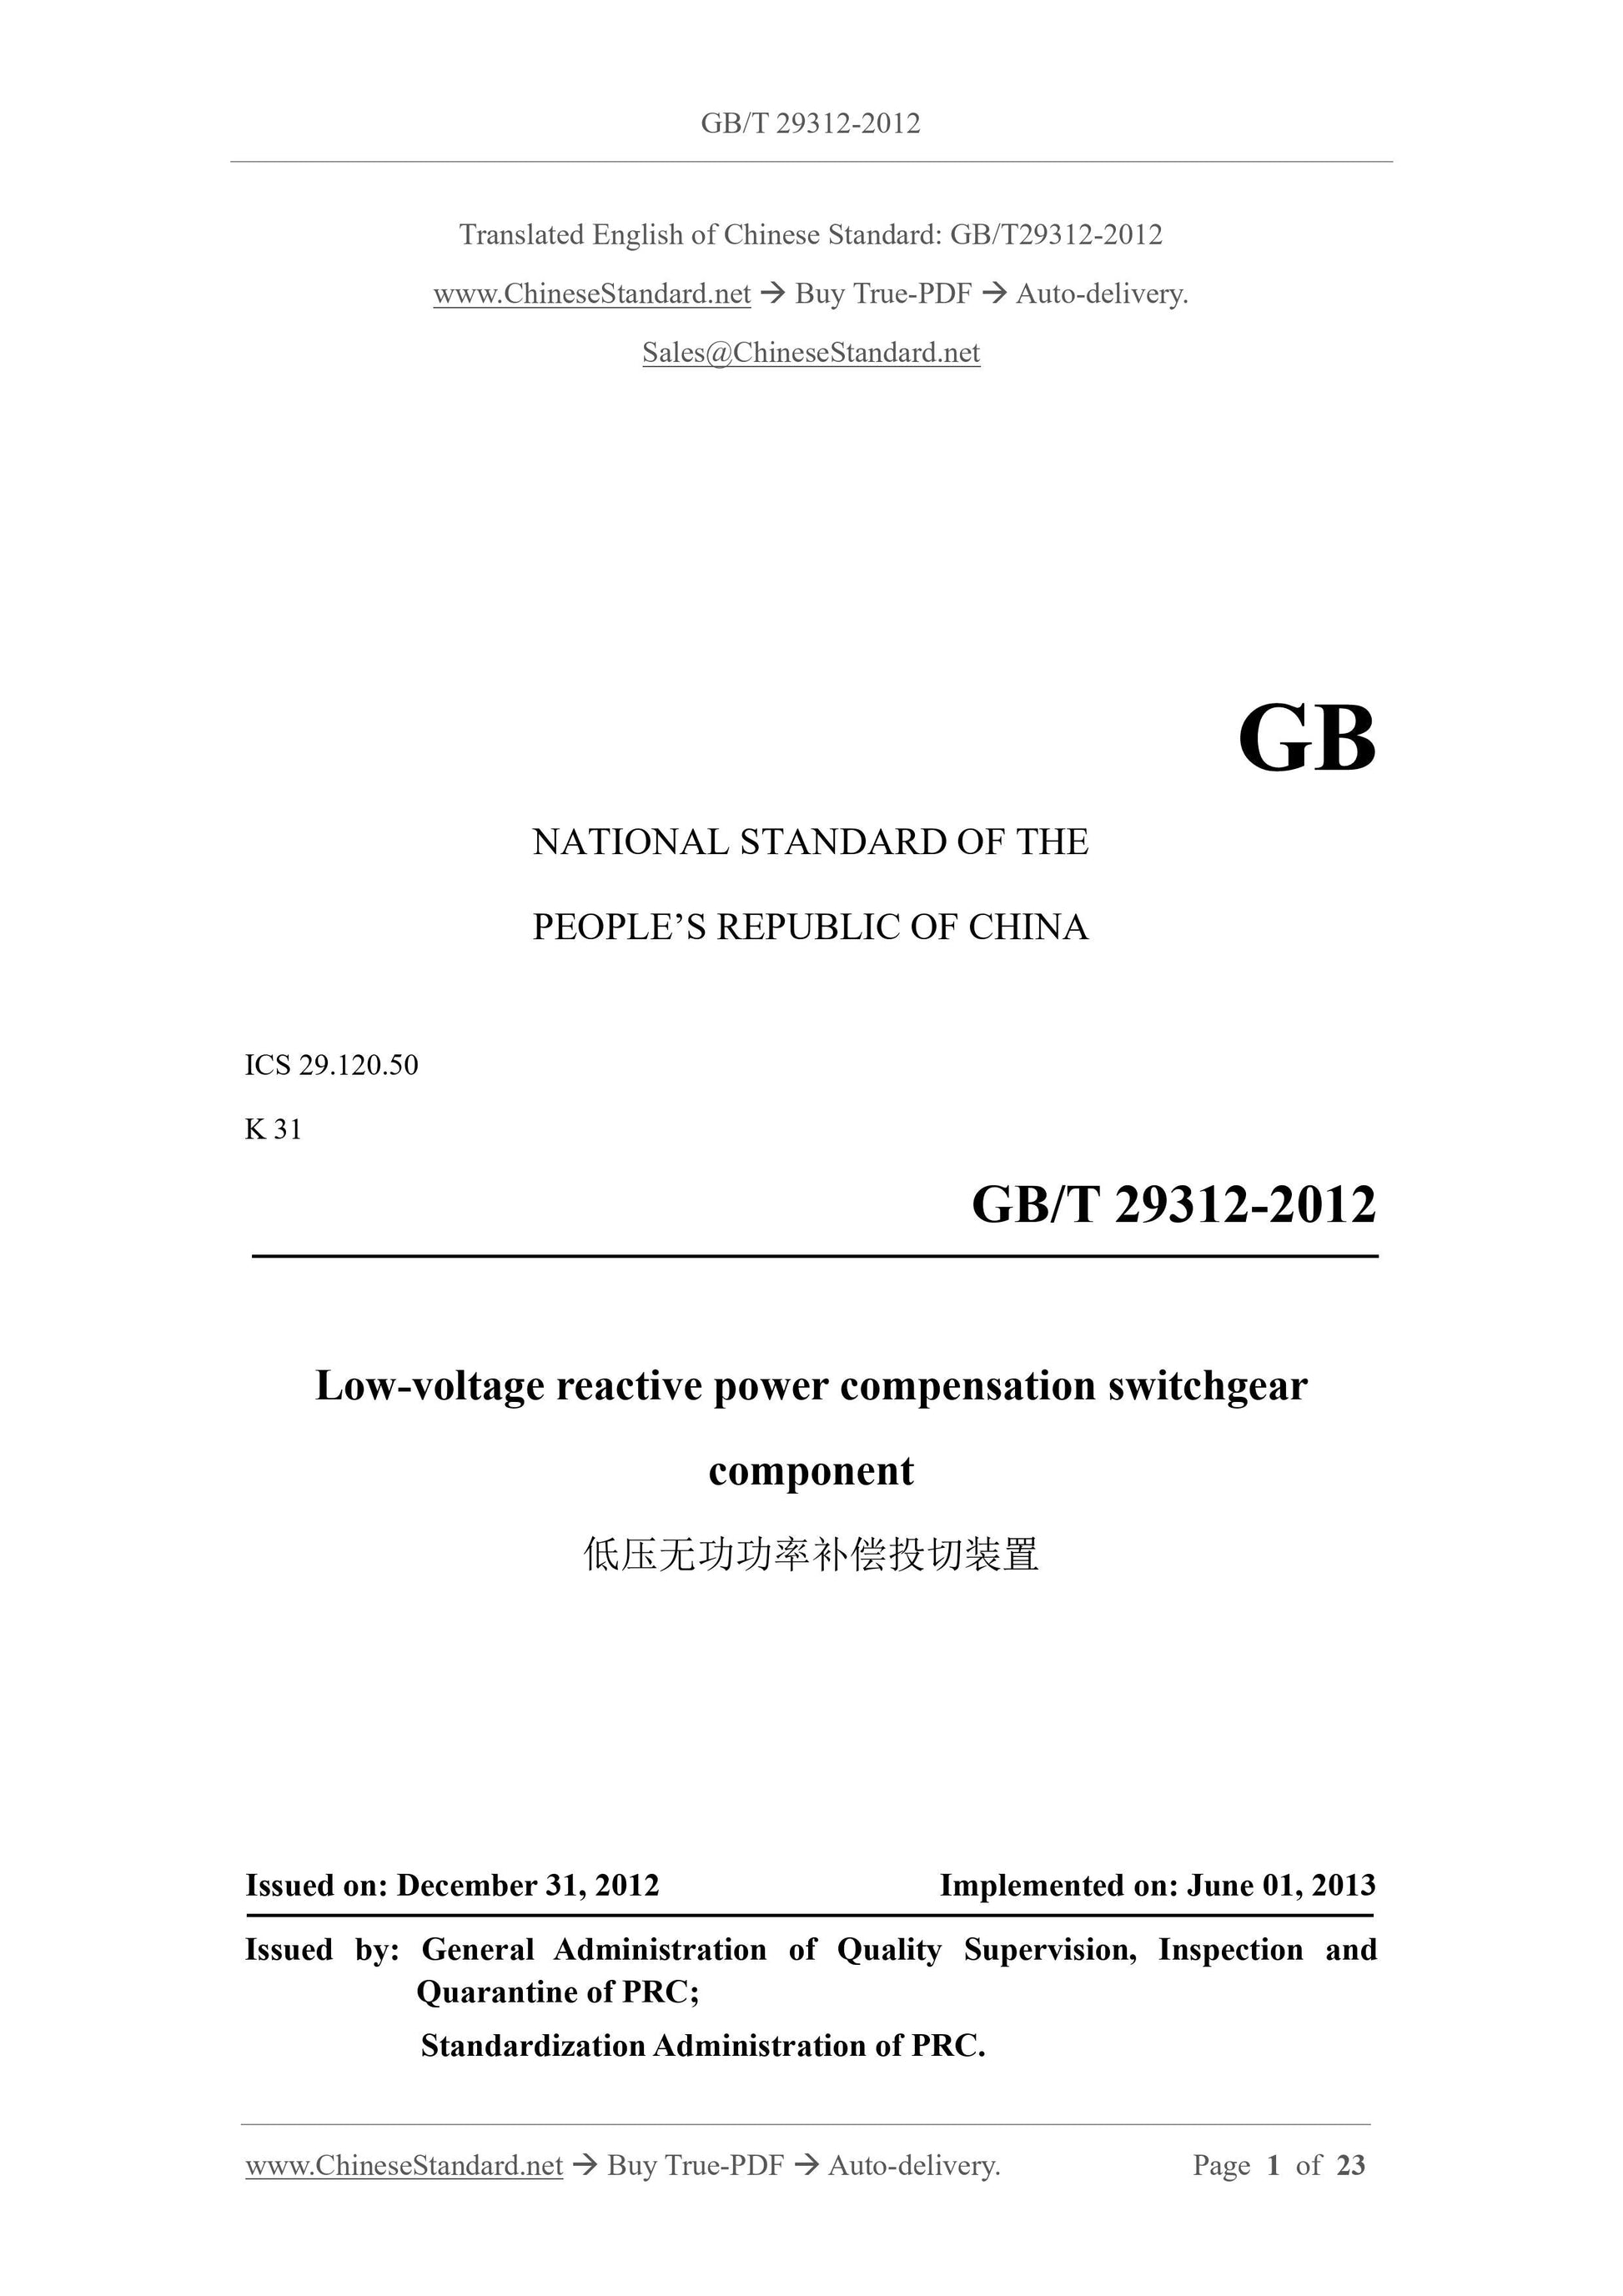 GB/T 29312-2012 Page 1